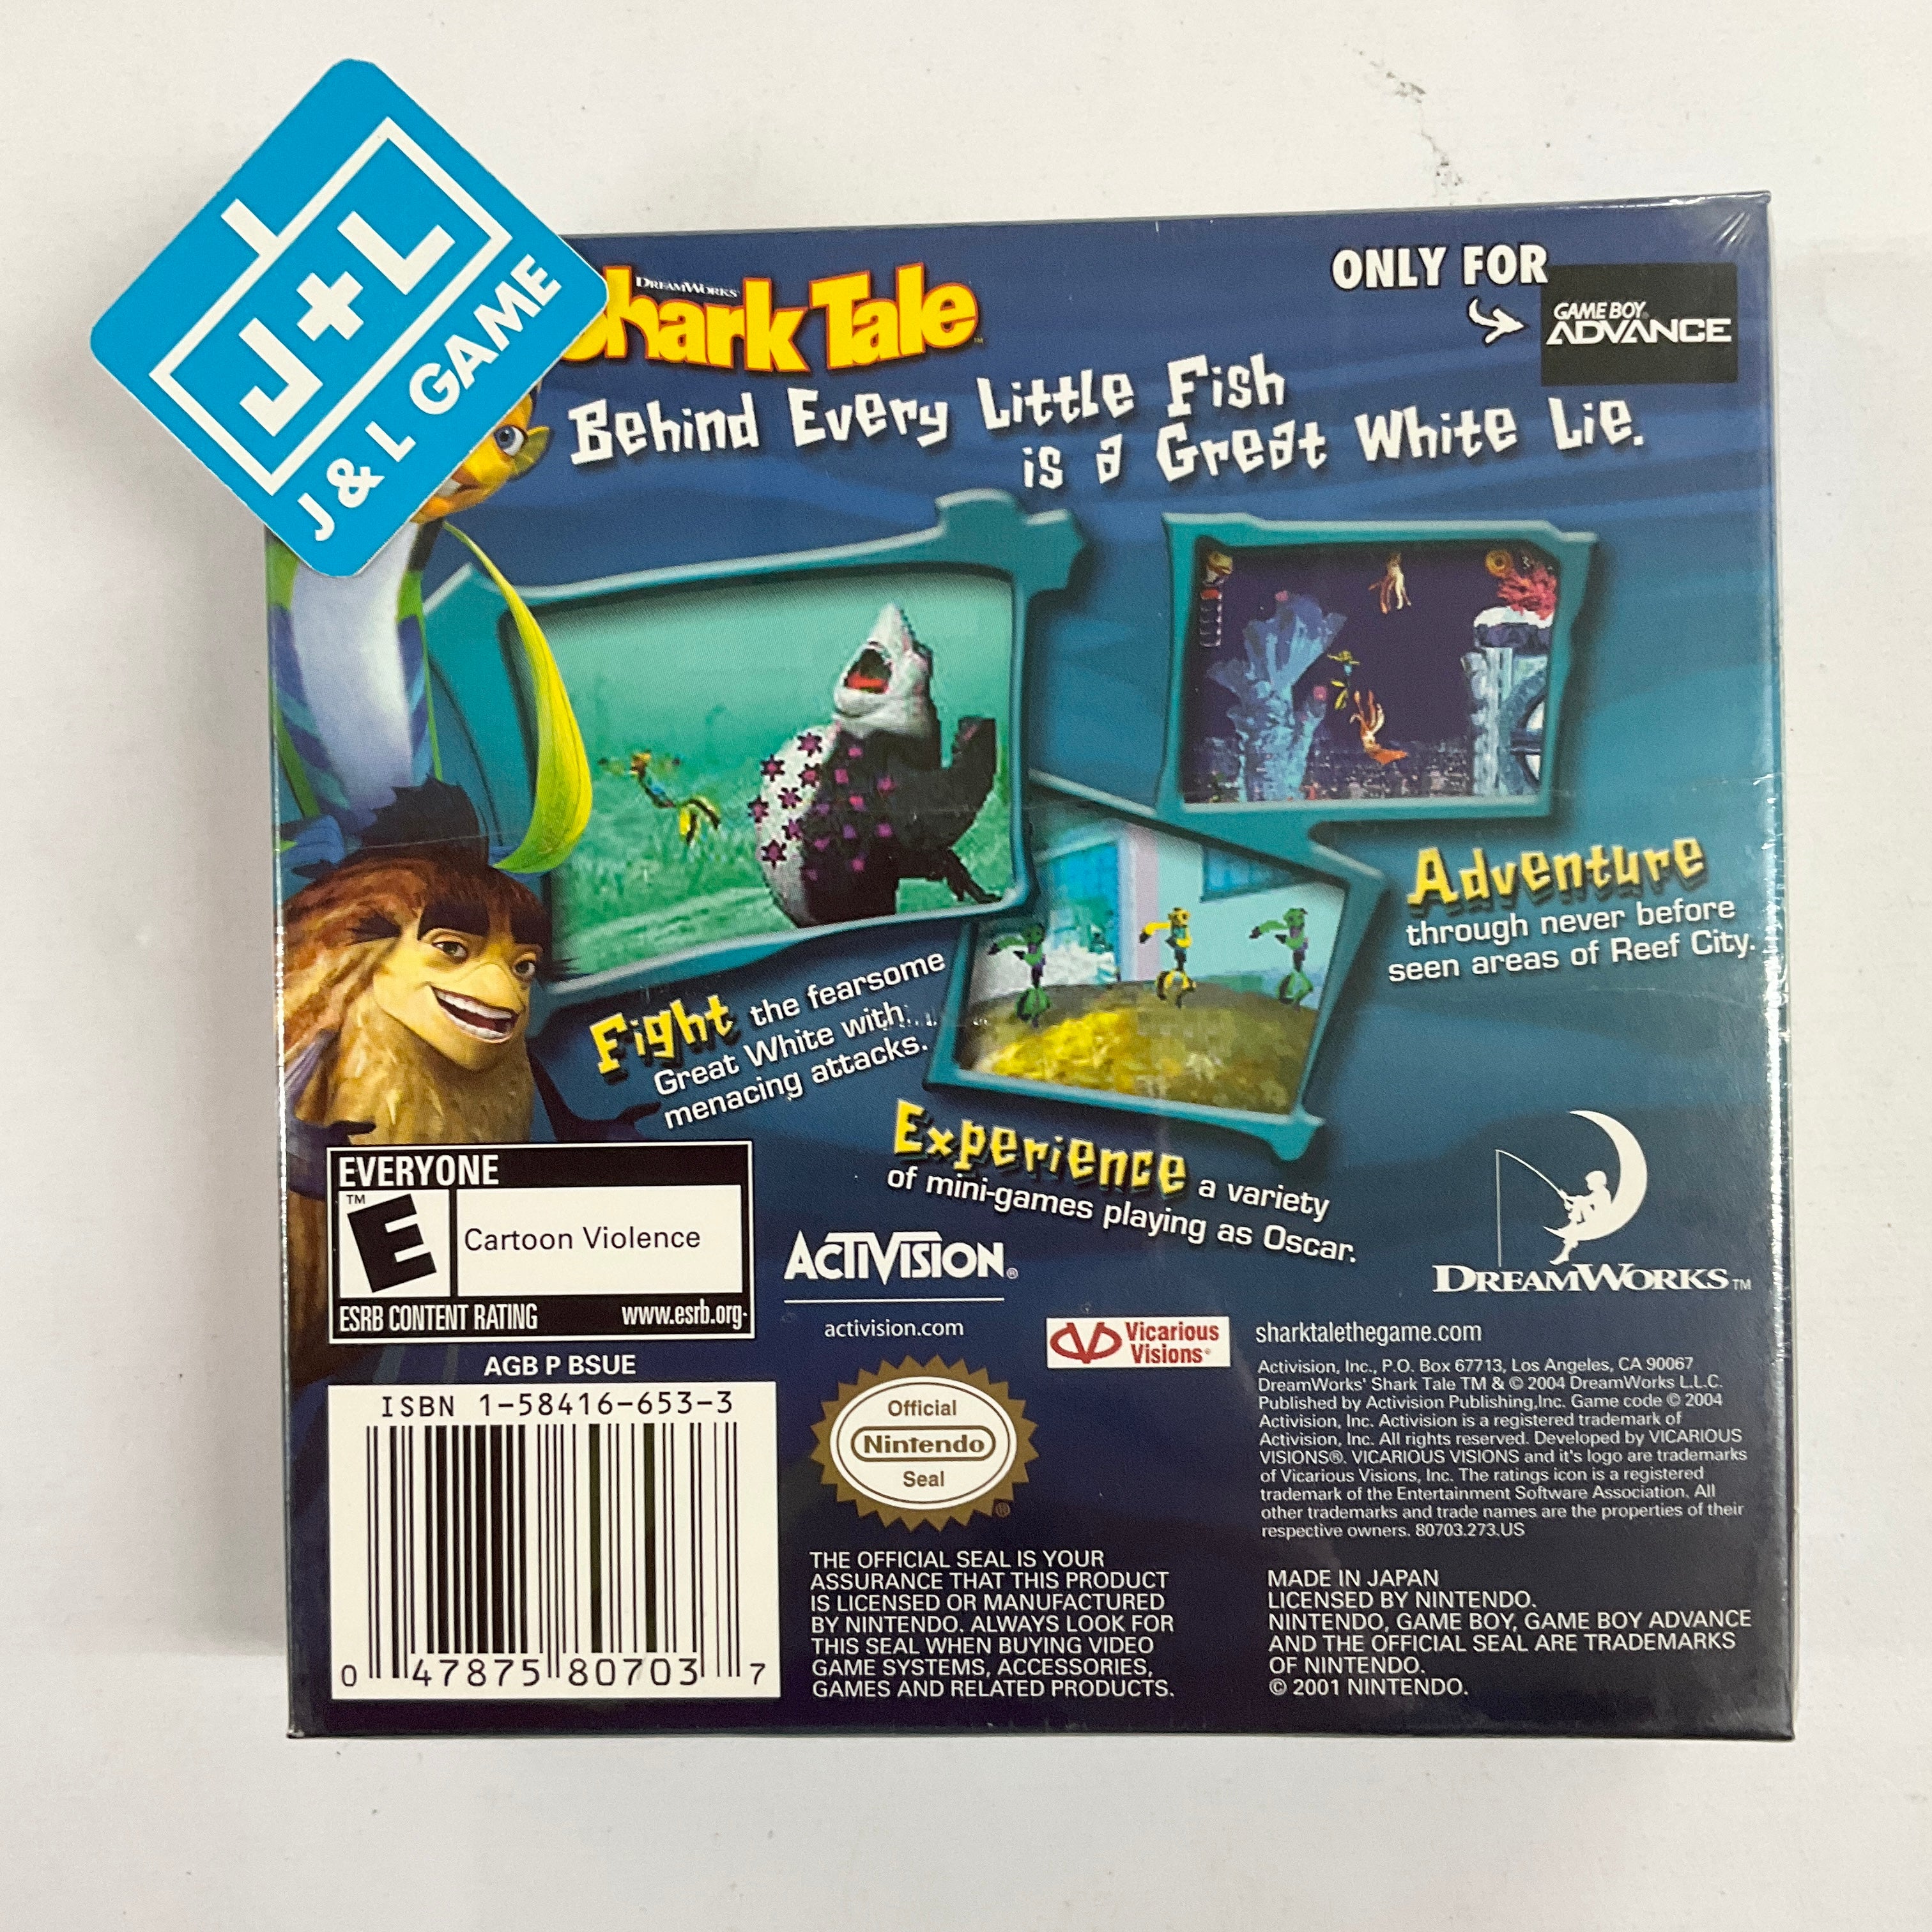 DreamWorks Shark Tale - (GBA) Game Boy Advance Video Games Activision   